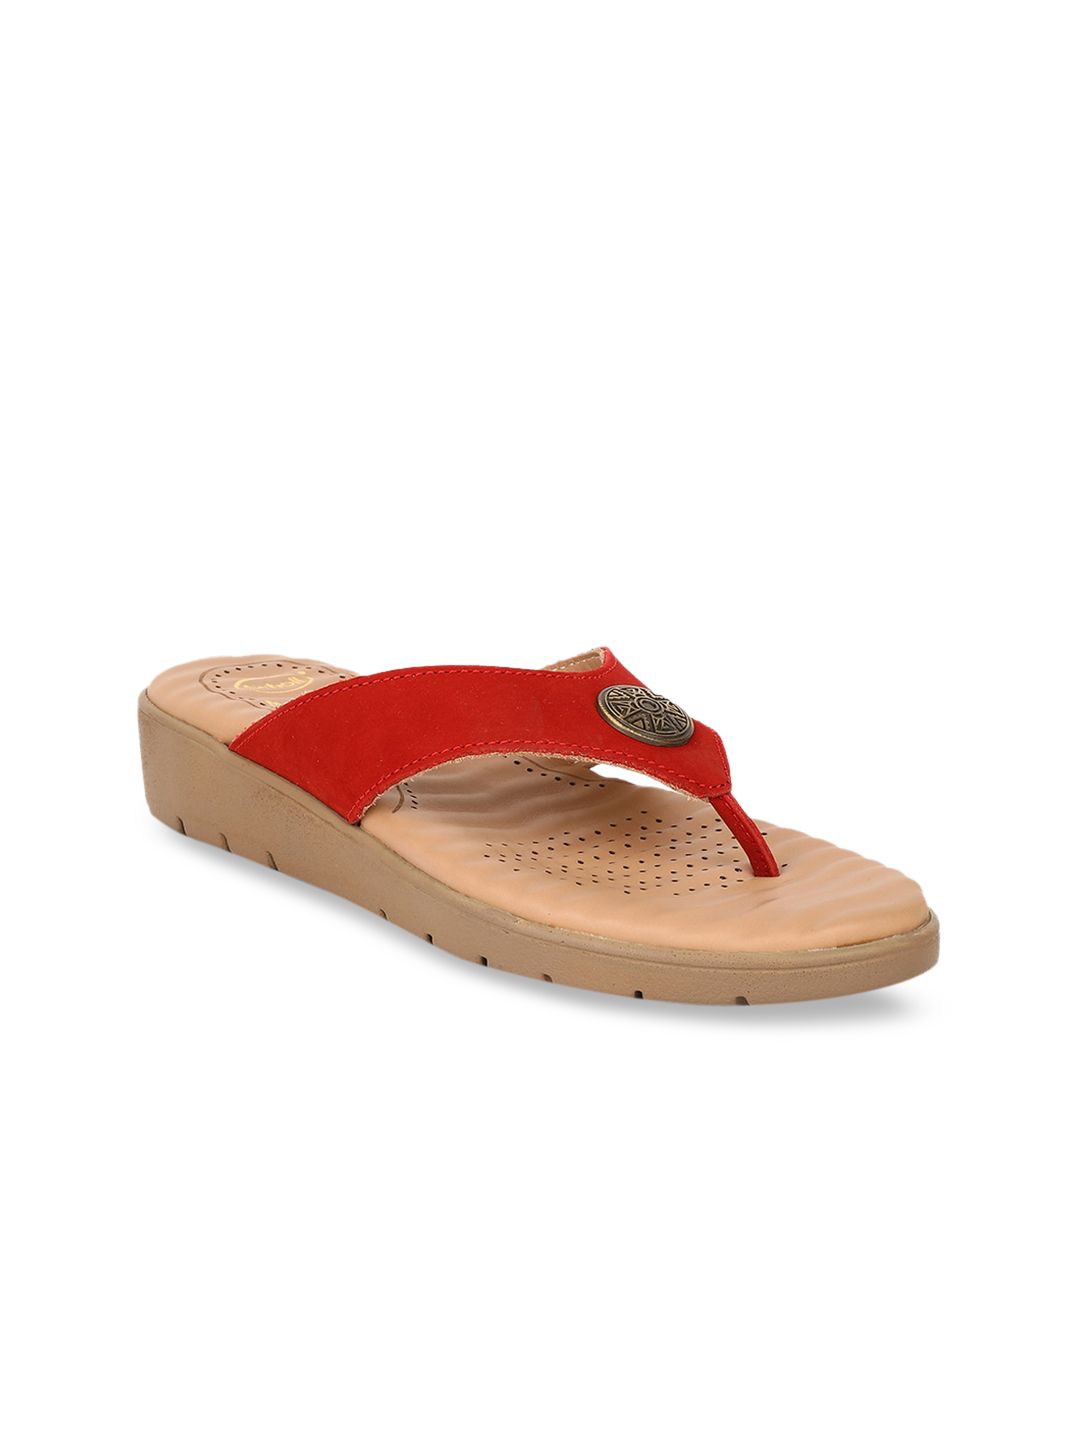 Scholl Women Red Solid Sandals Price in India